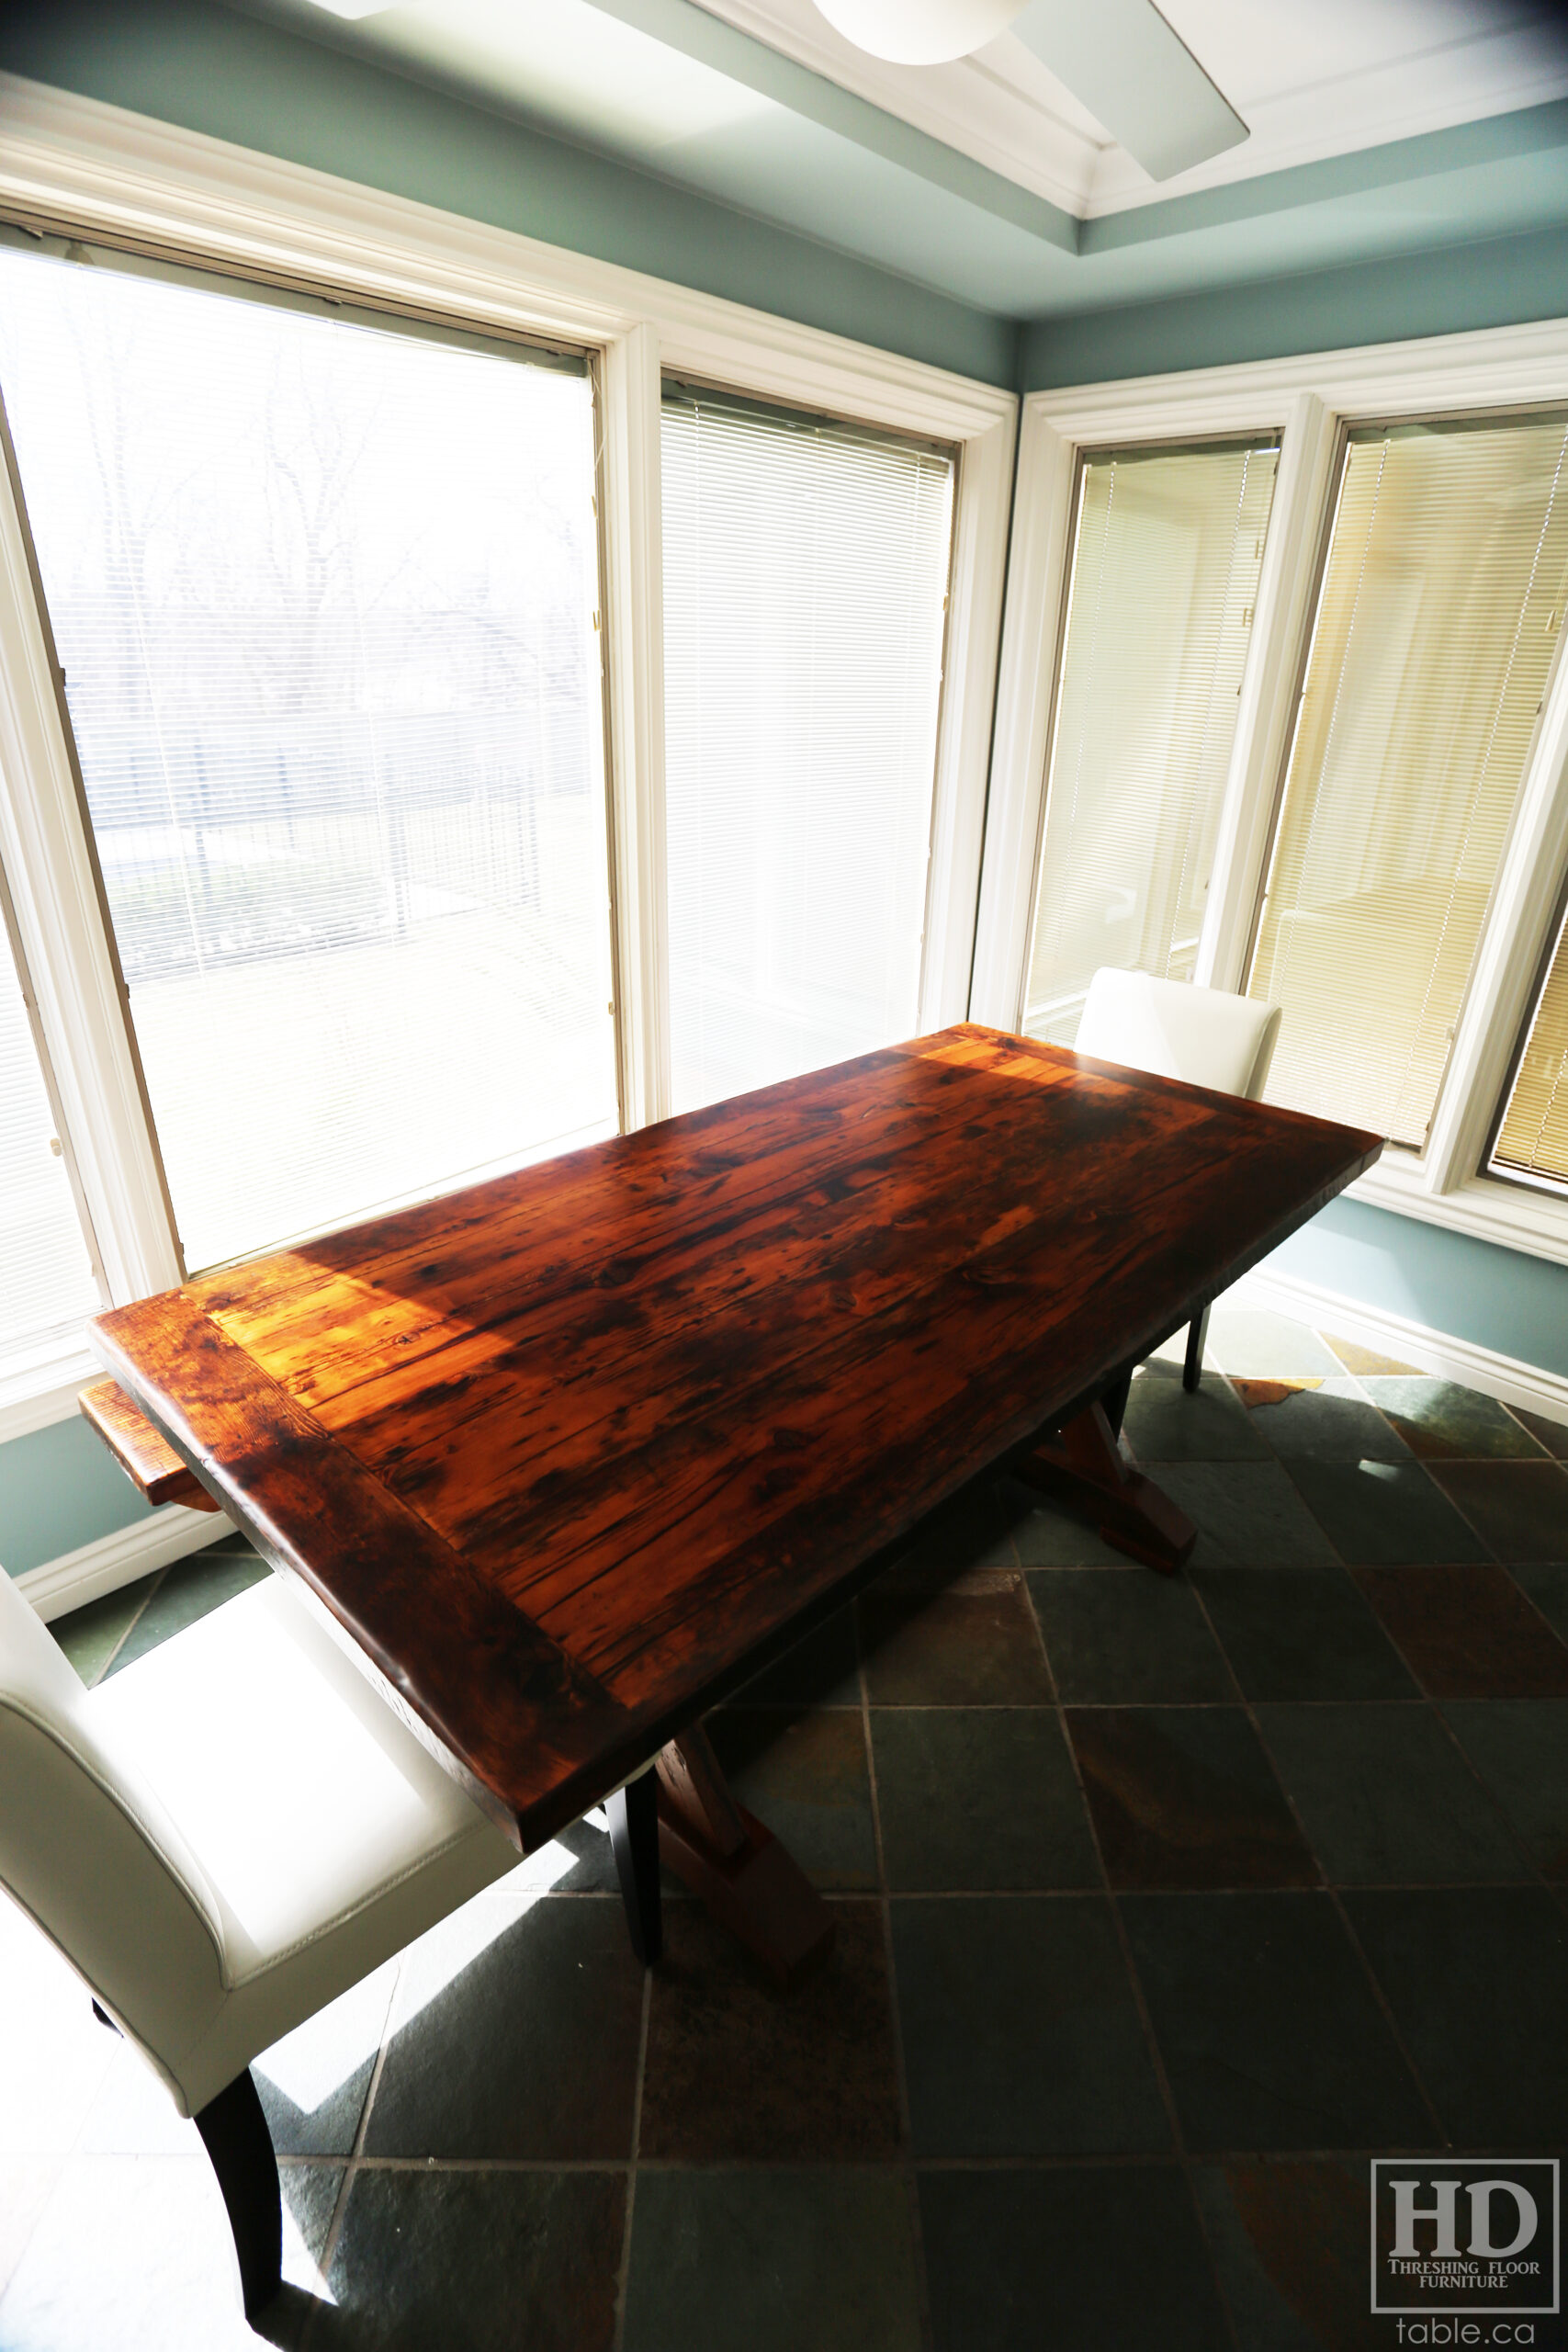 Reclaimed Barnwood Table with Trestle Base by HD Threshing Floor Furniture / www.table.ca